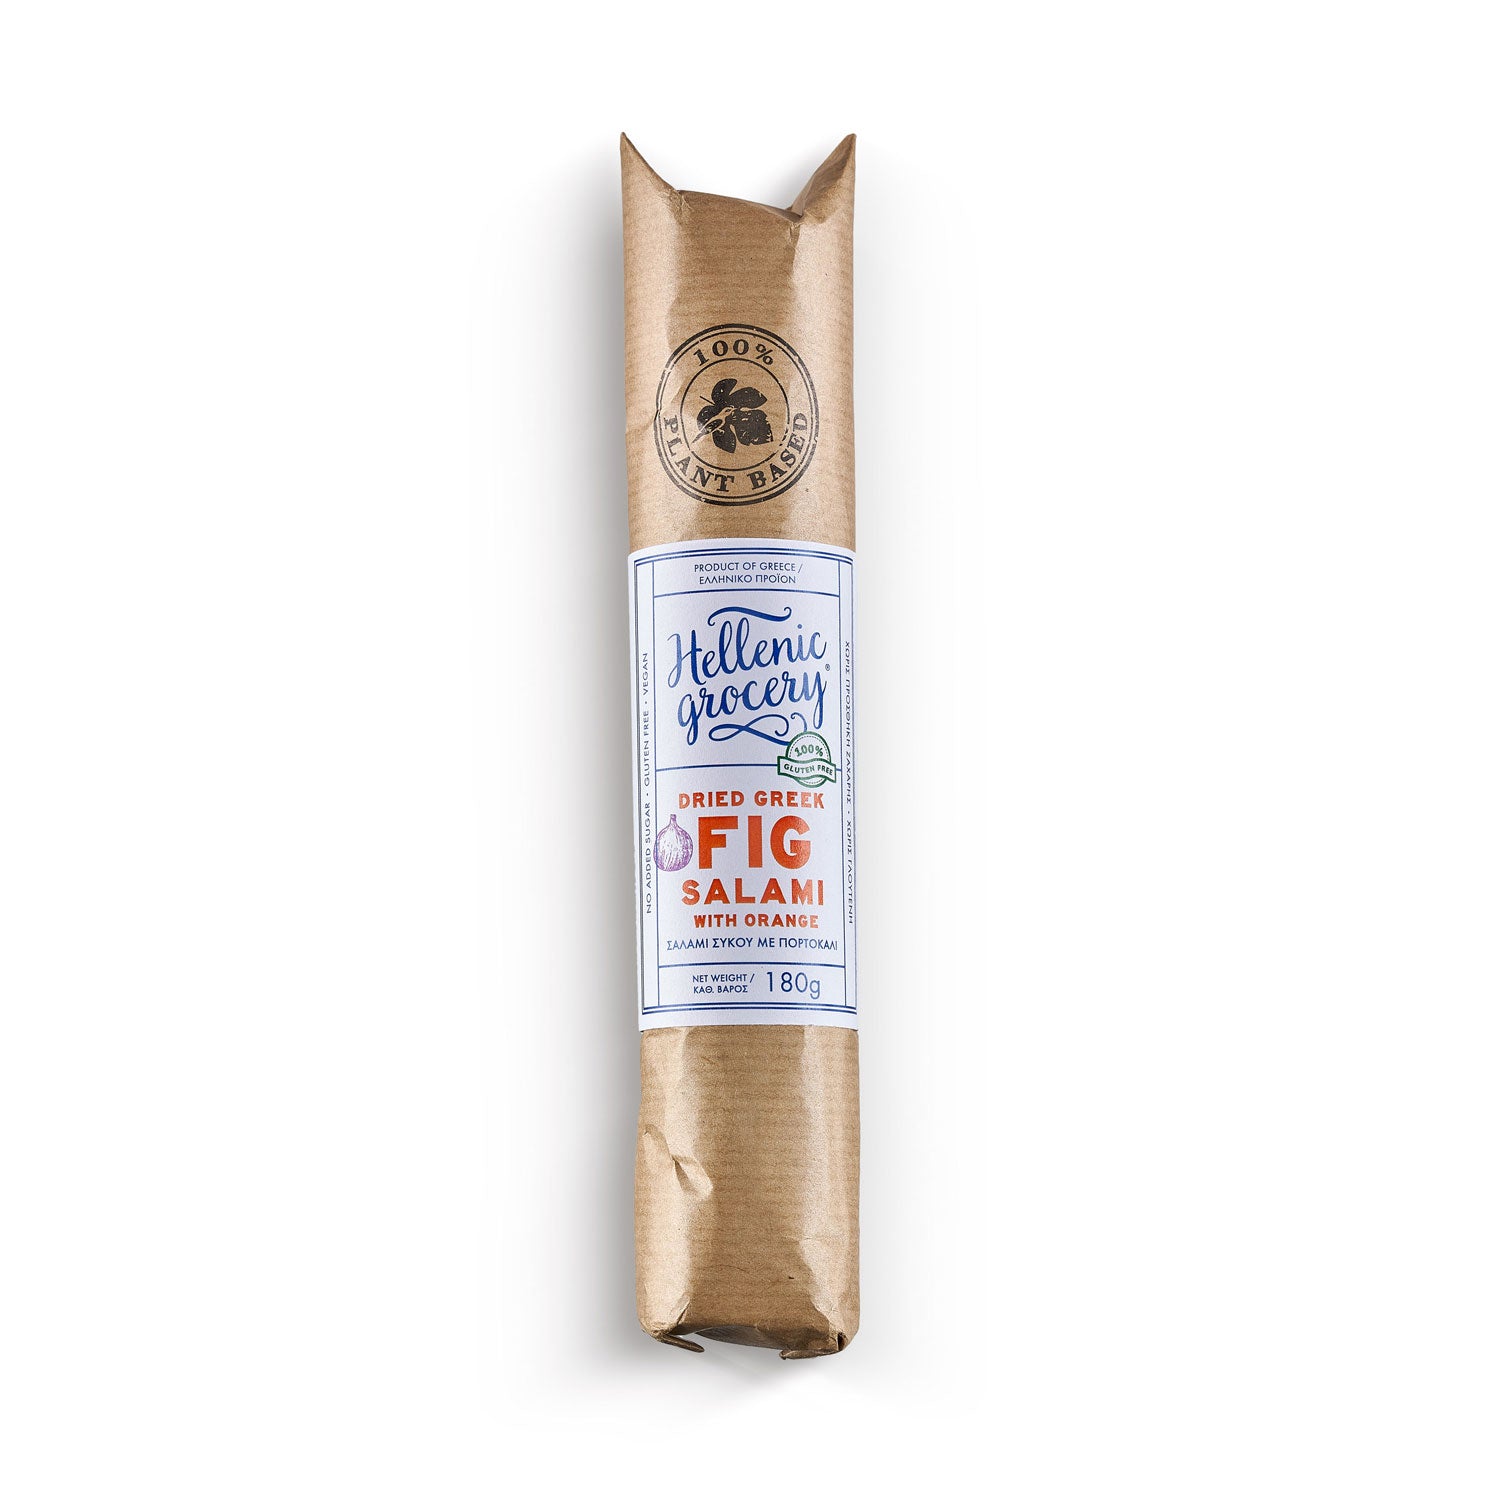 Dried Fig Salami with Orange - 180g - Hellenic Grocery